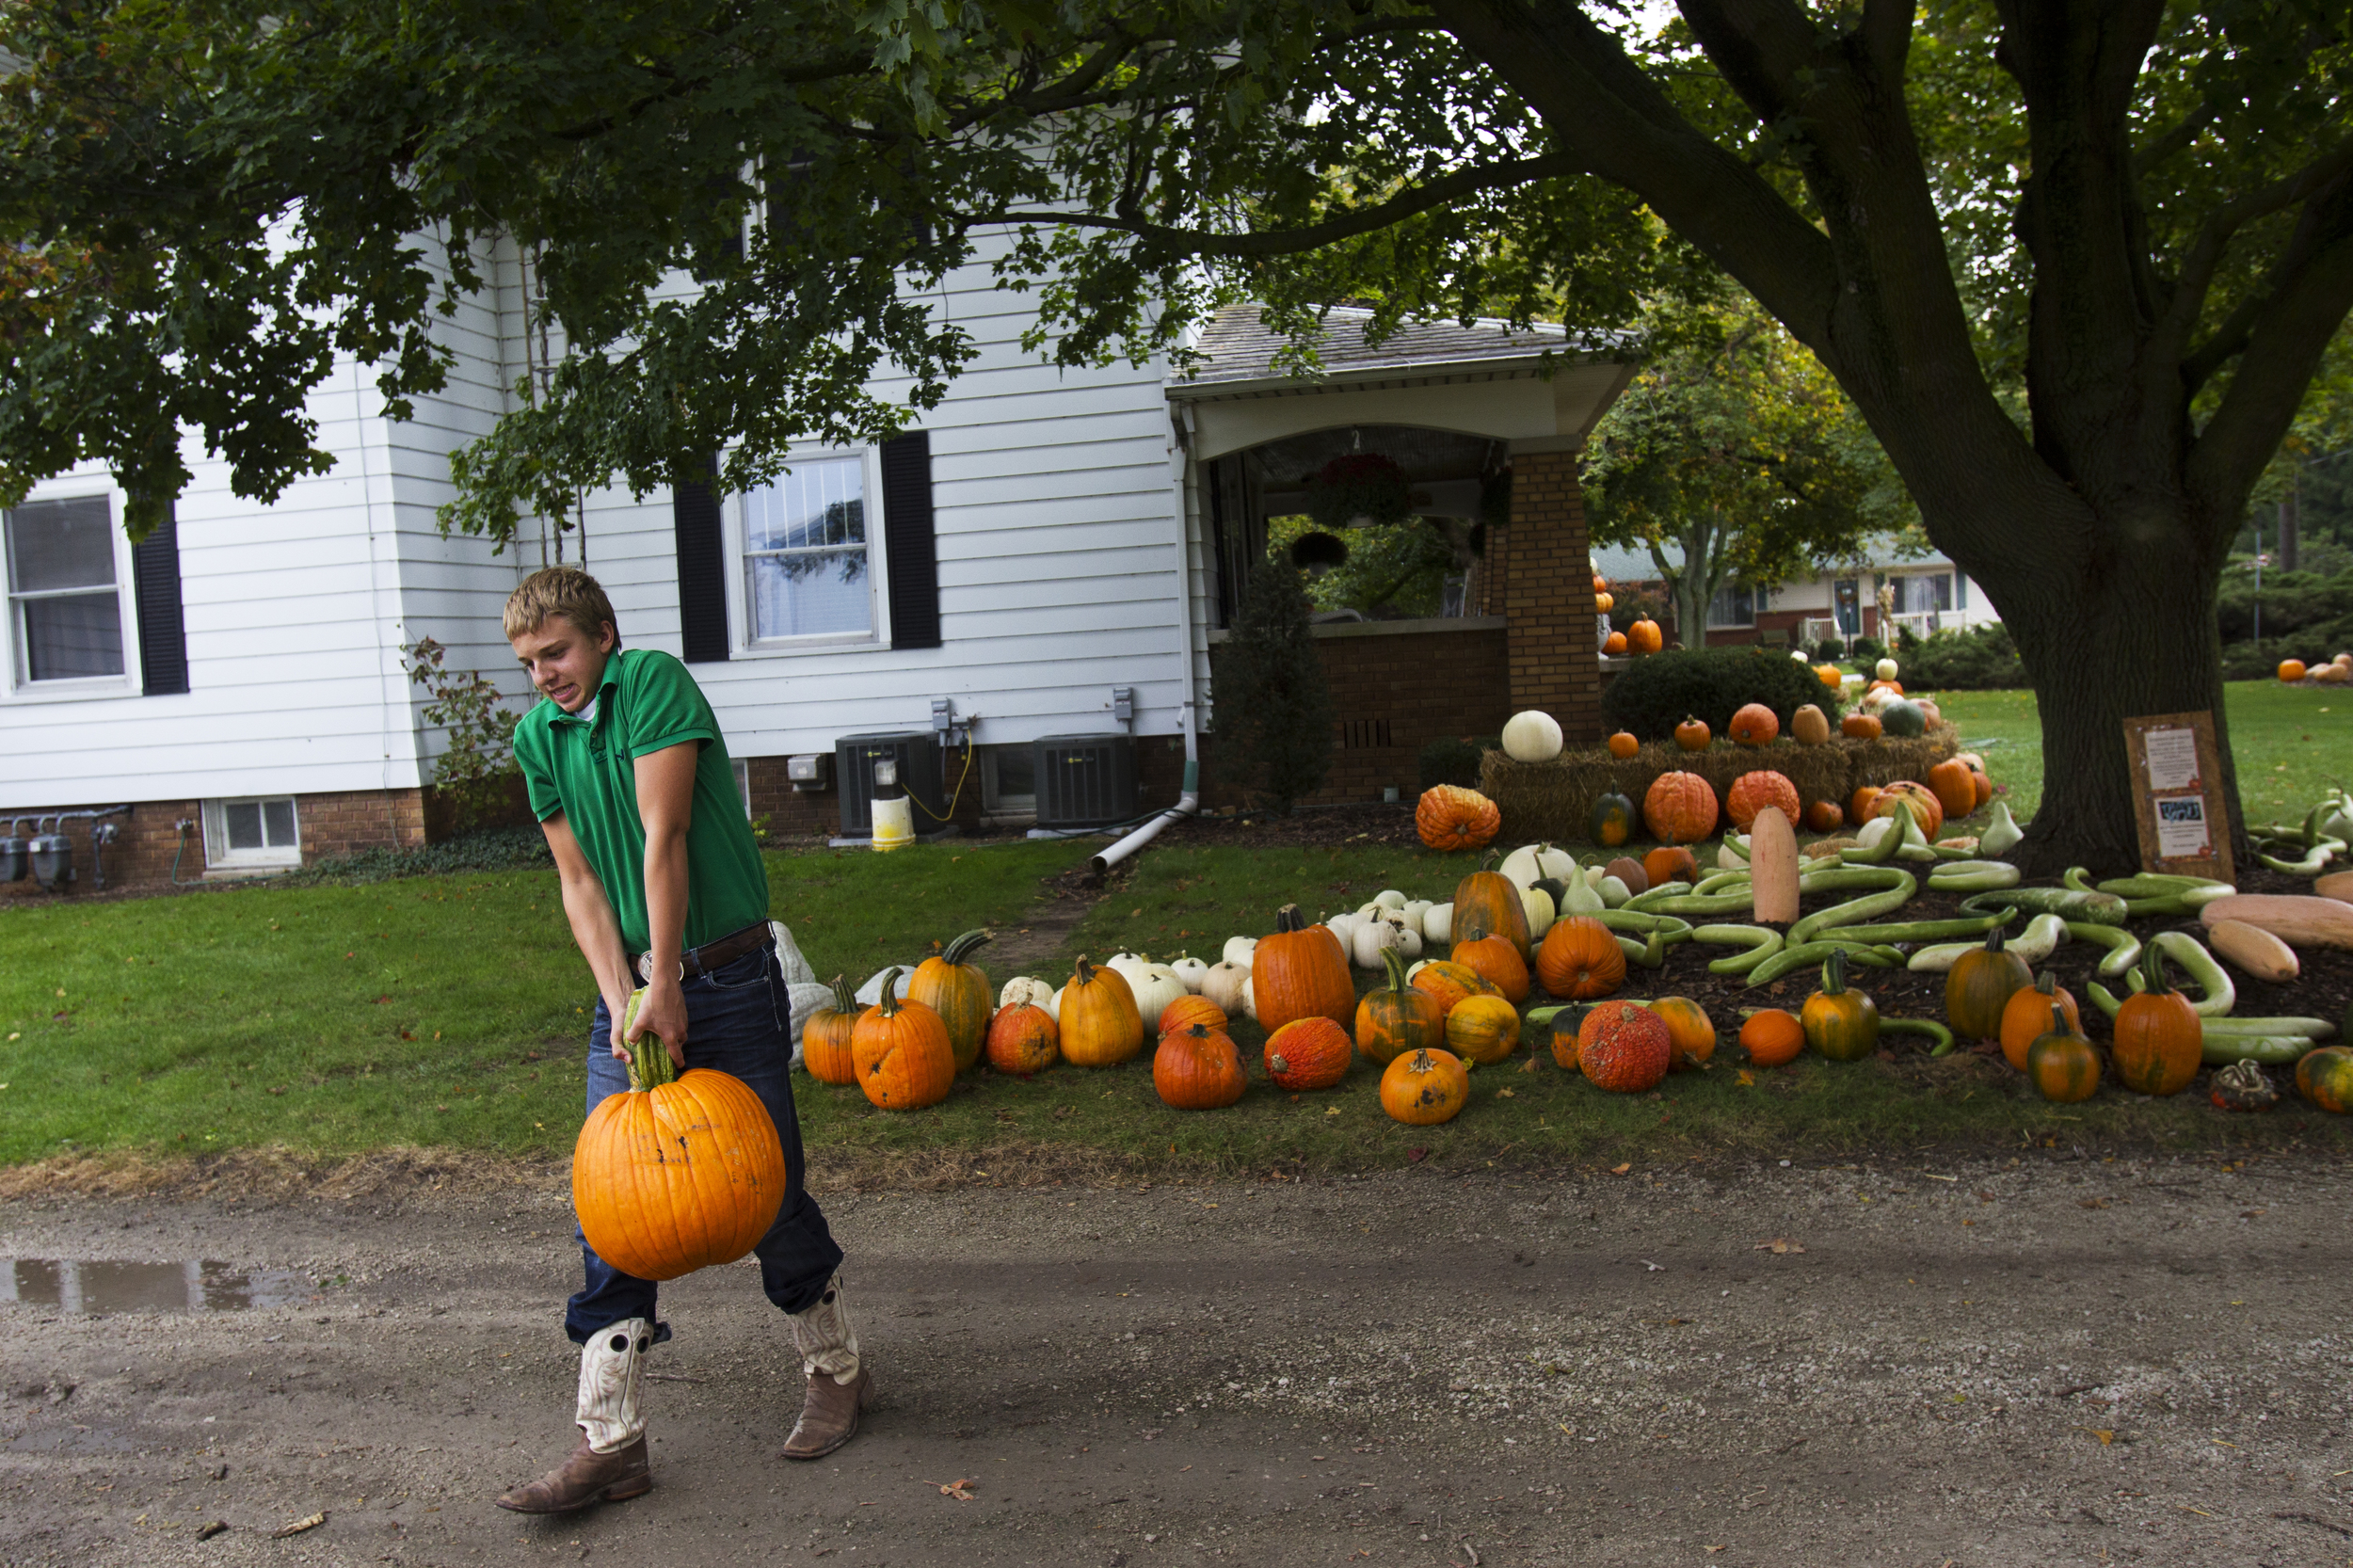  A local boy lugs a pumpkin back to his mother's truck from the Abke property just outside Pemberville, Ohio. The Abke's get by on their family farm by holding day jobs and selling seasonal produce. Anyone who purchases their produce is on the honor 